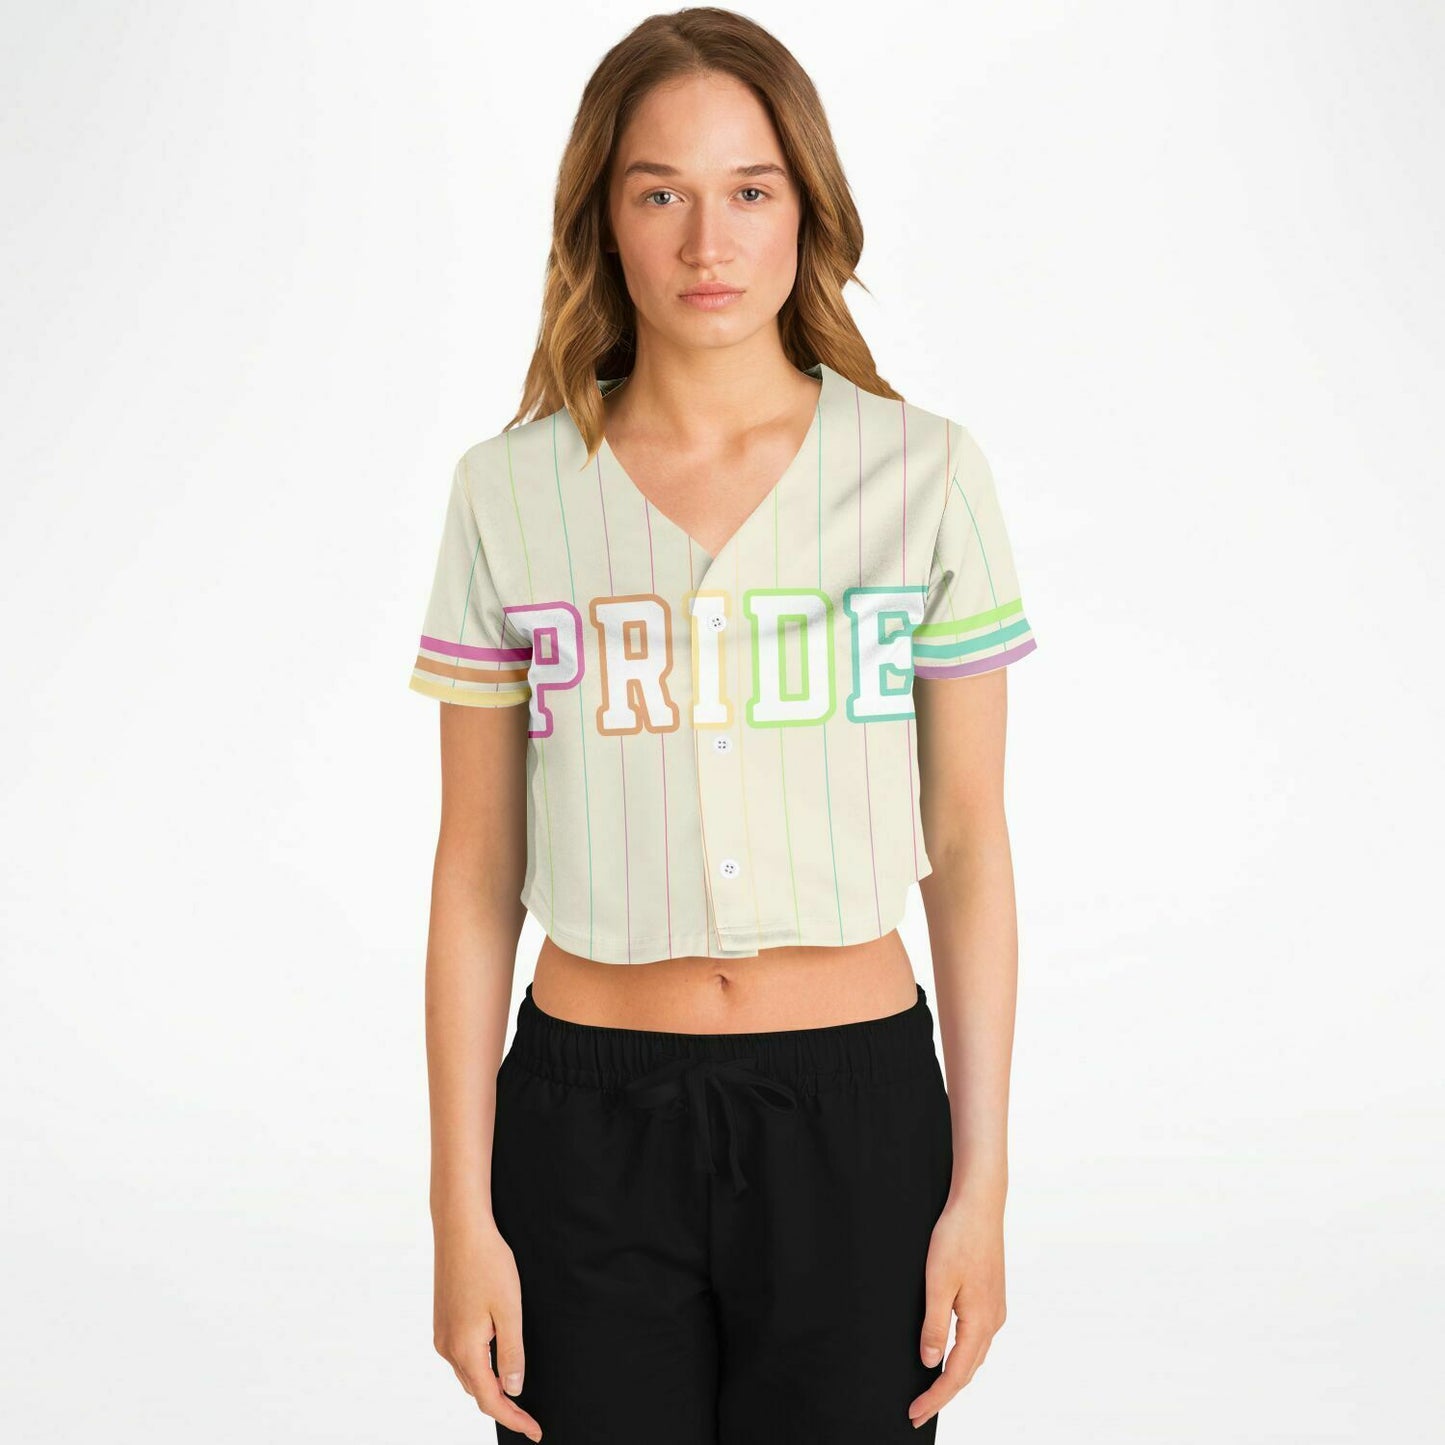 Pride Cropped Jersey | Love is Love Cropped Jersey copy